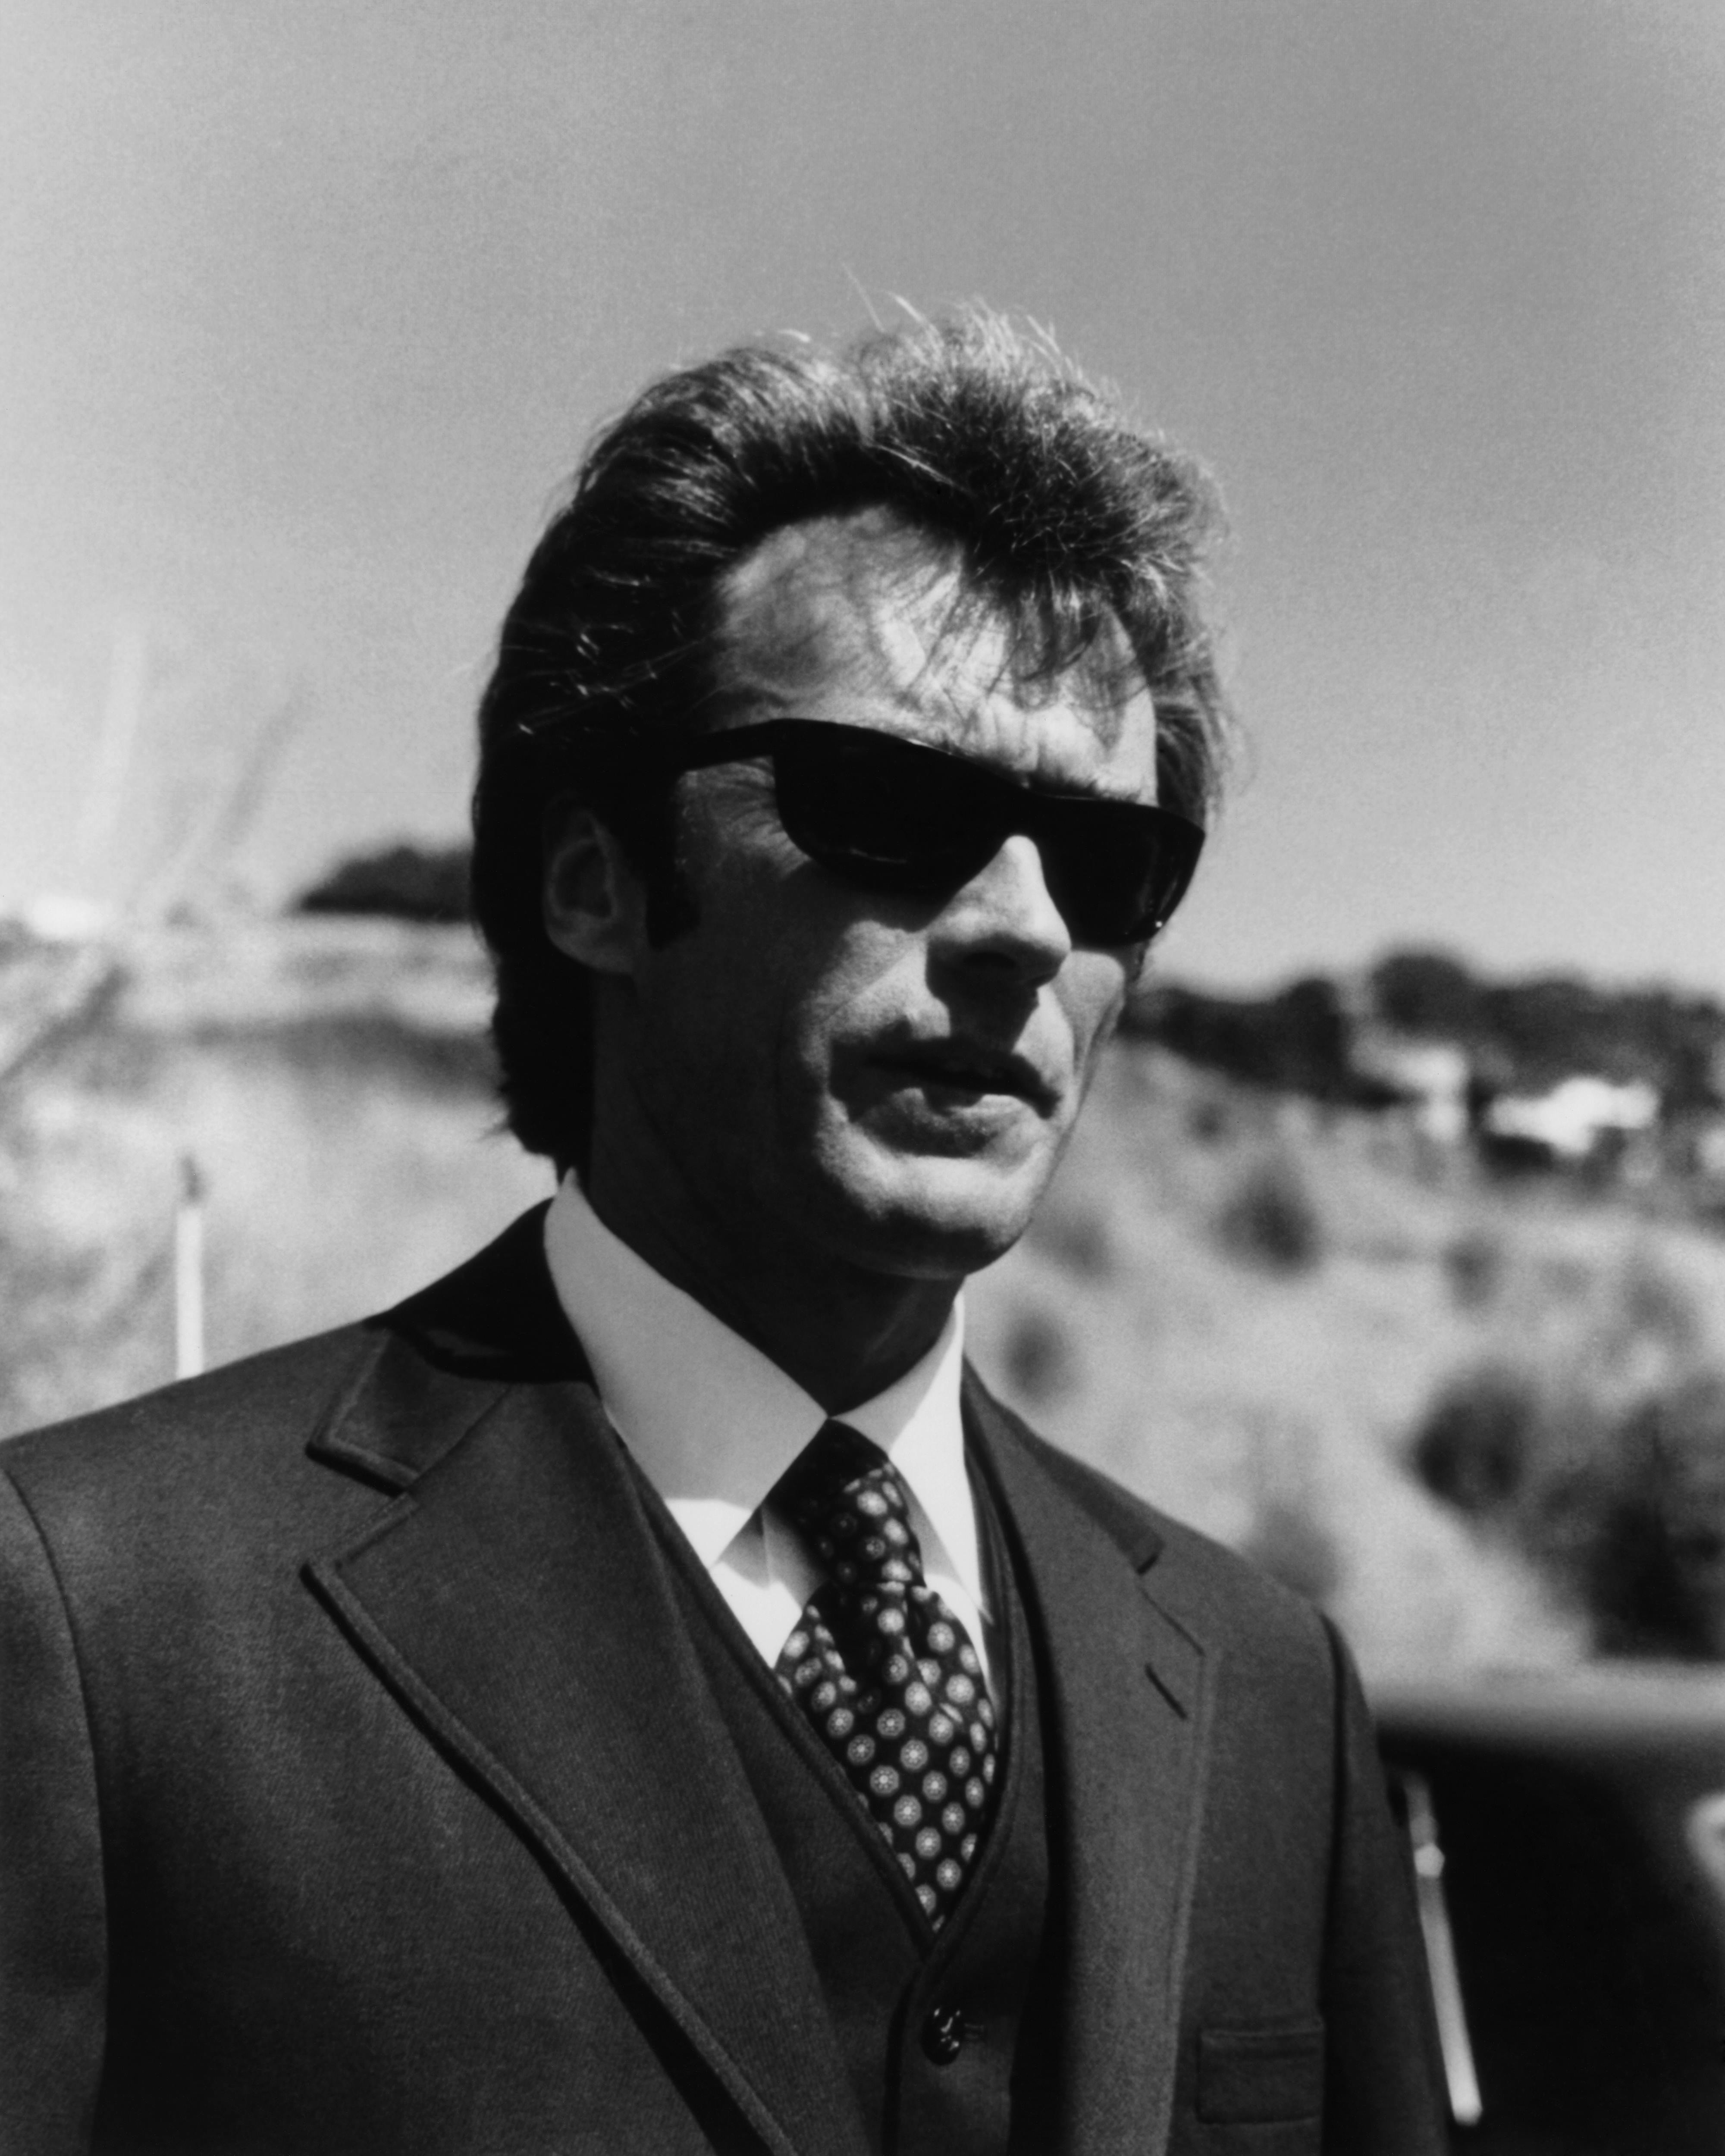 Clint Eastwood outside with a two-piece suit and sunglasses.